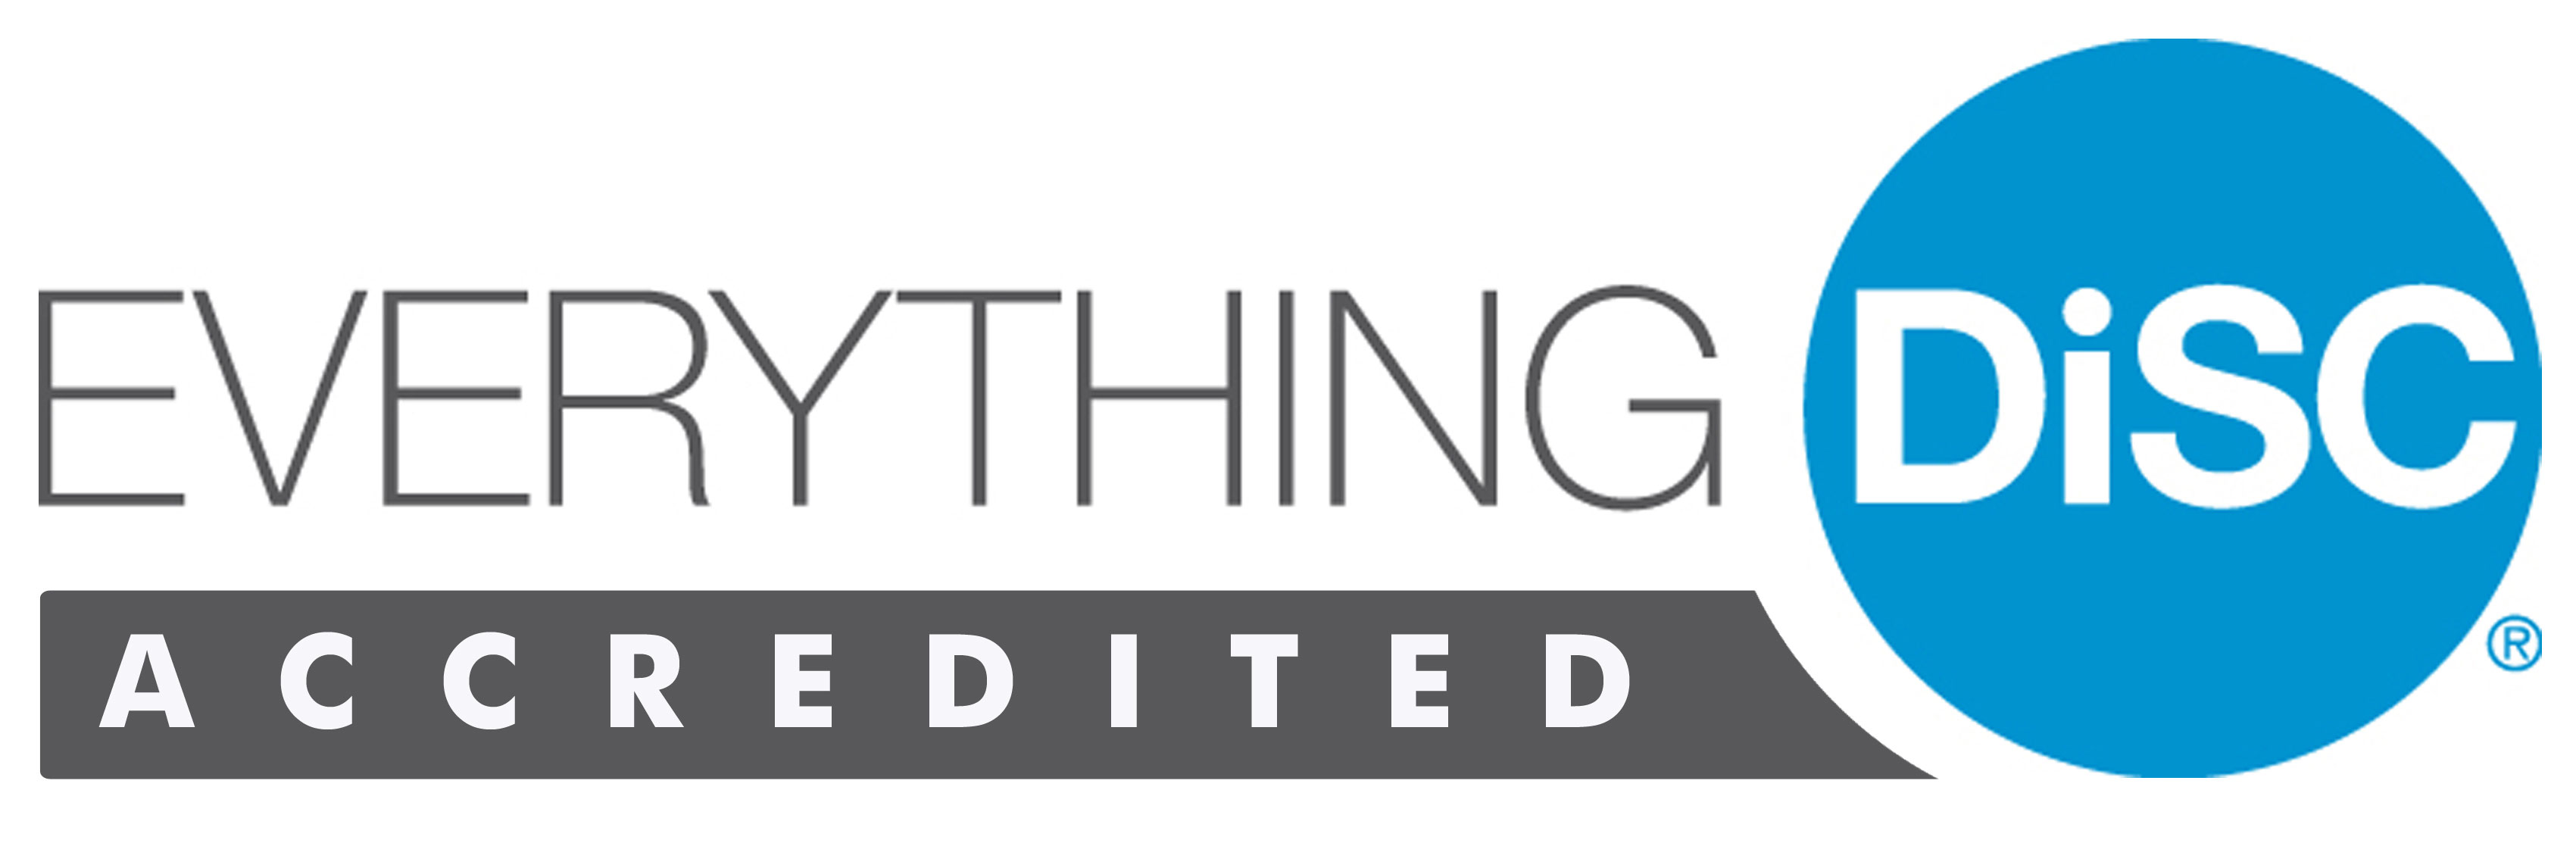 everything disc accredited logo